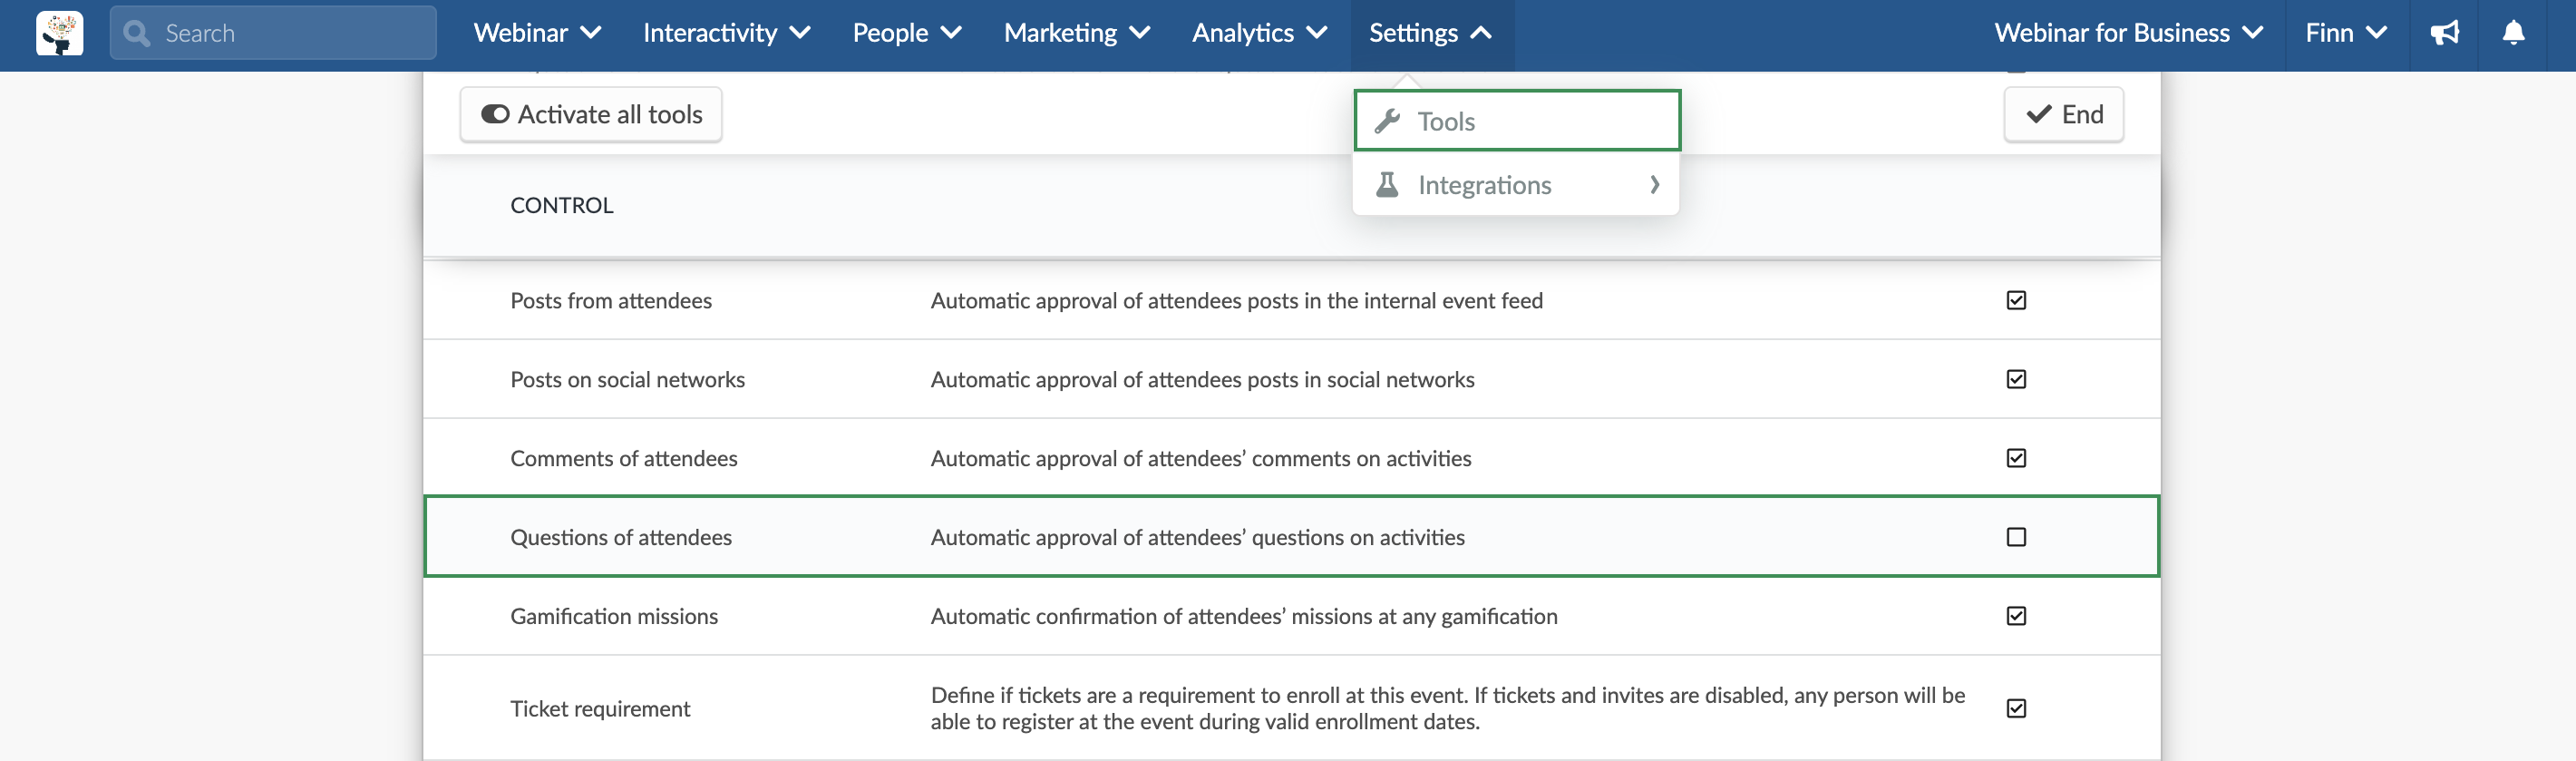 Disabling automatic approval of attendees questions in the activities